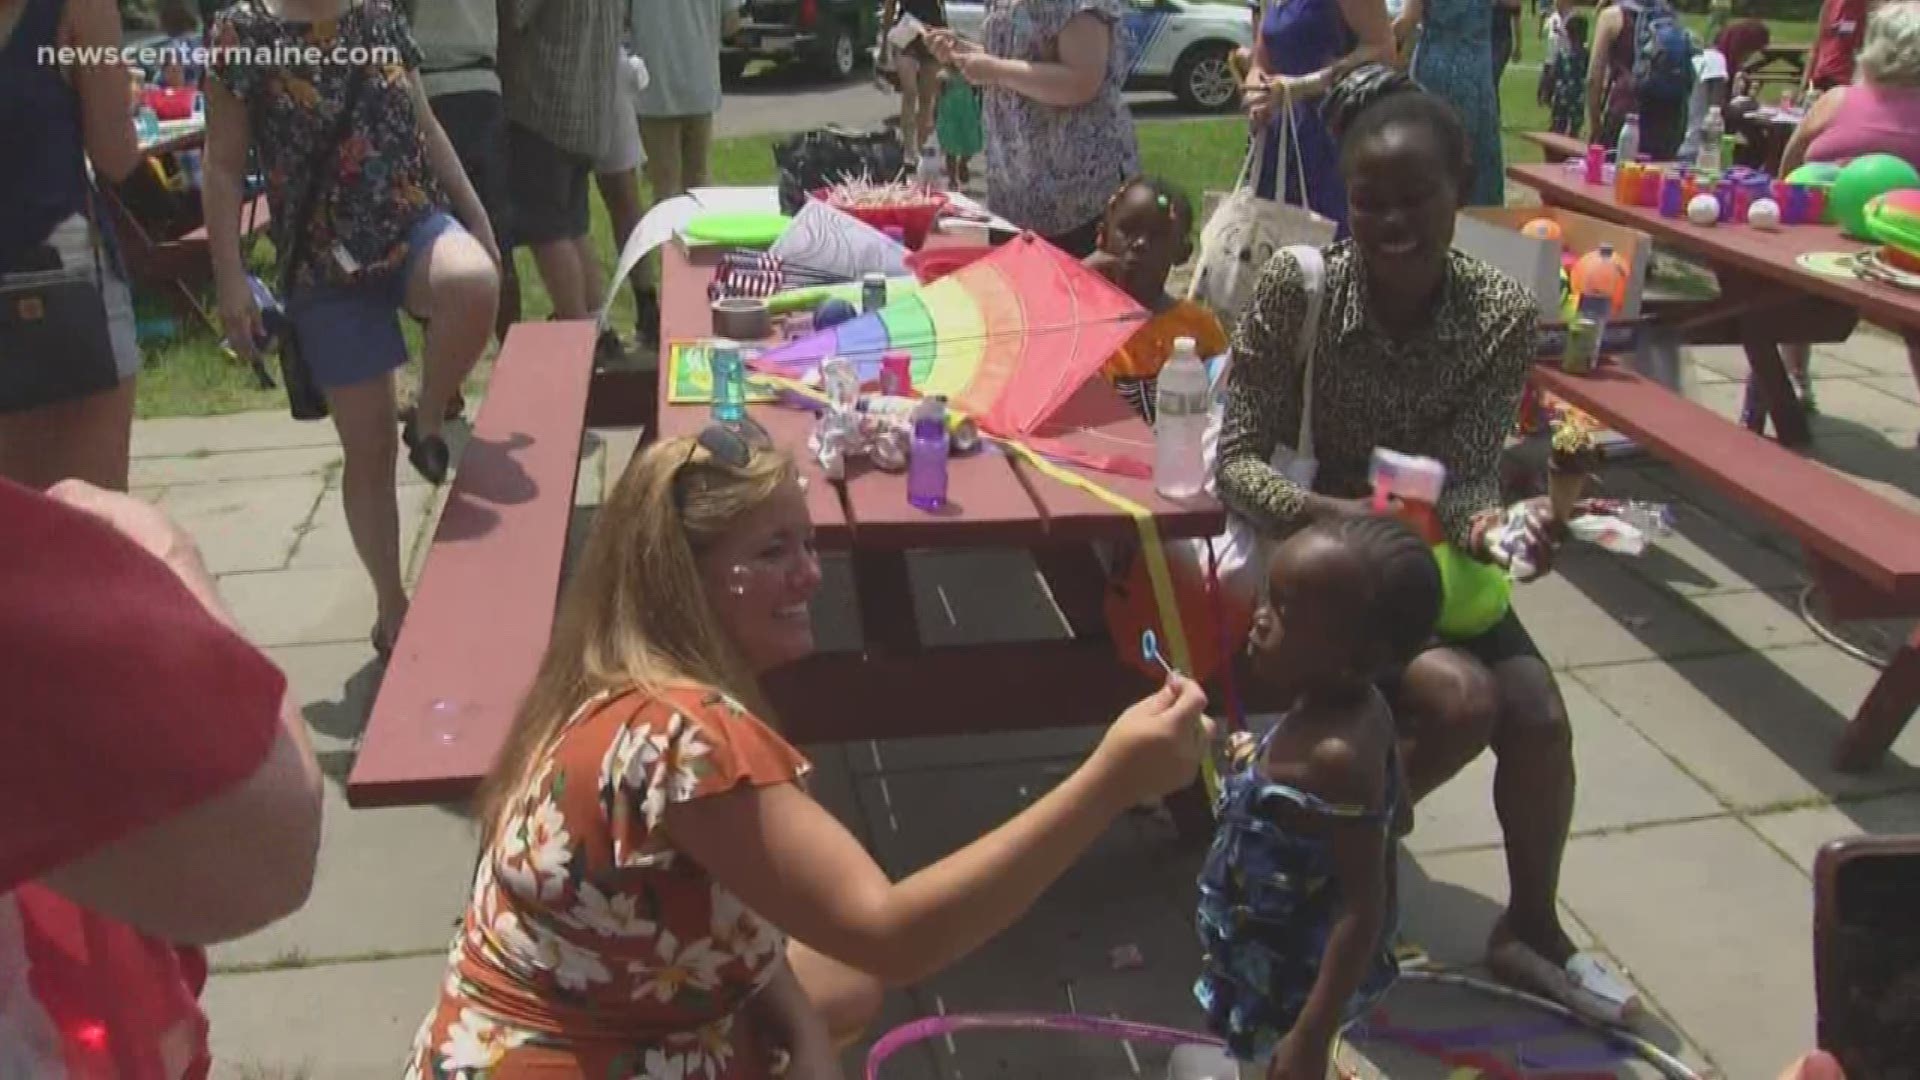 The over 250 asylum seekers in Portland were invited to a welcome picnic on July 4, put on by Maine volunteers.